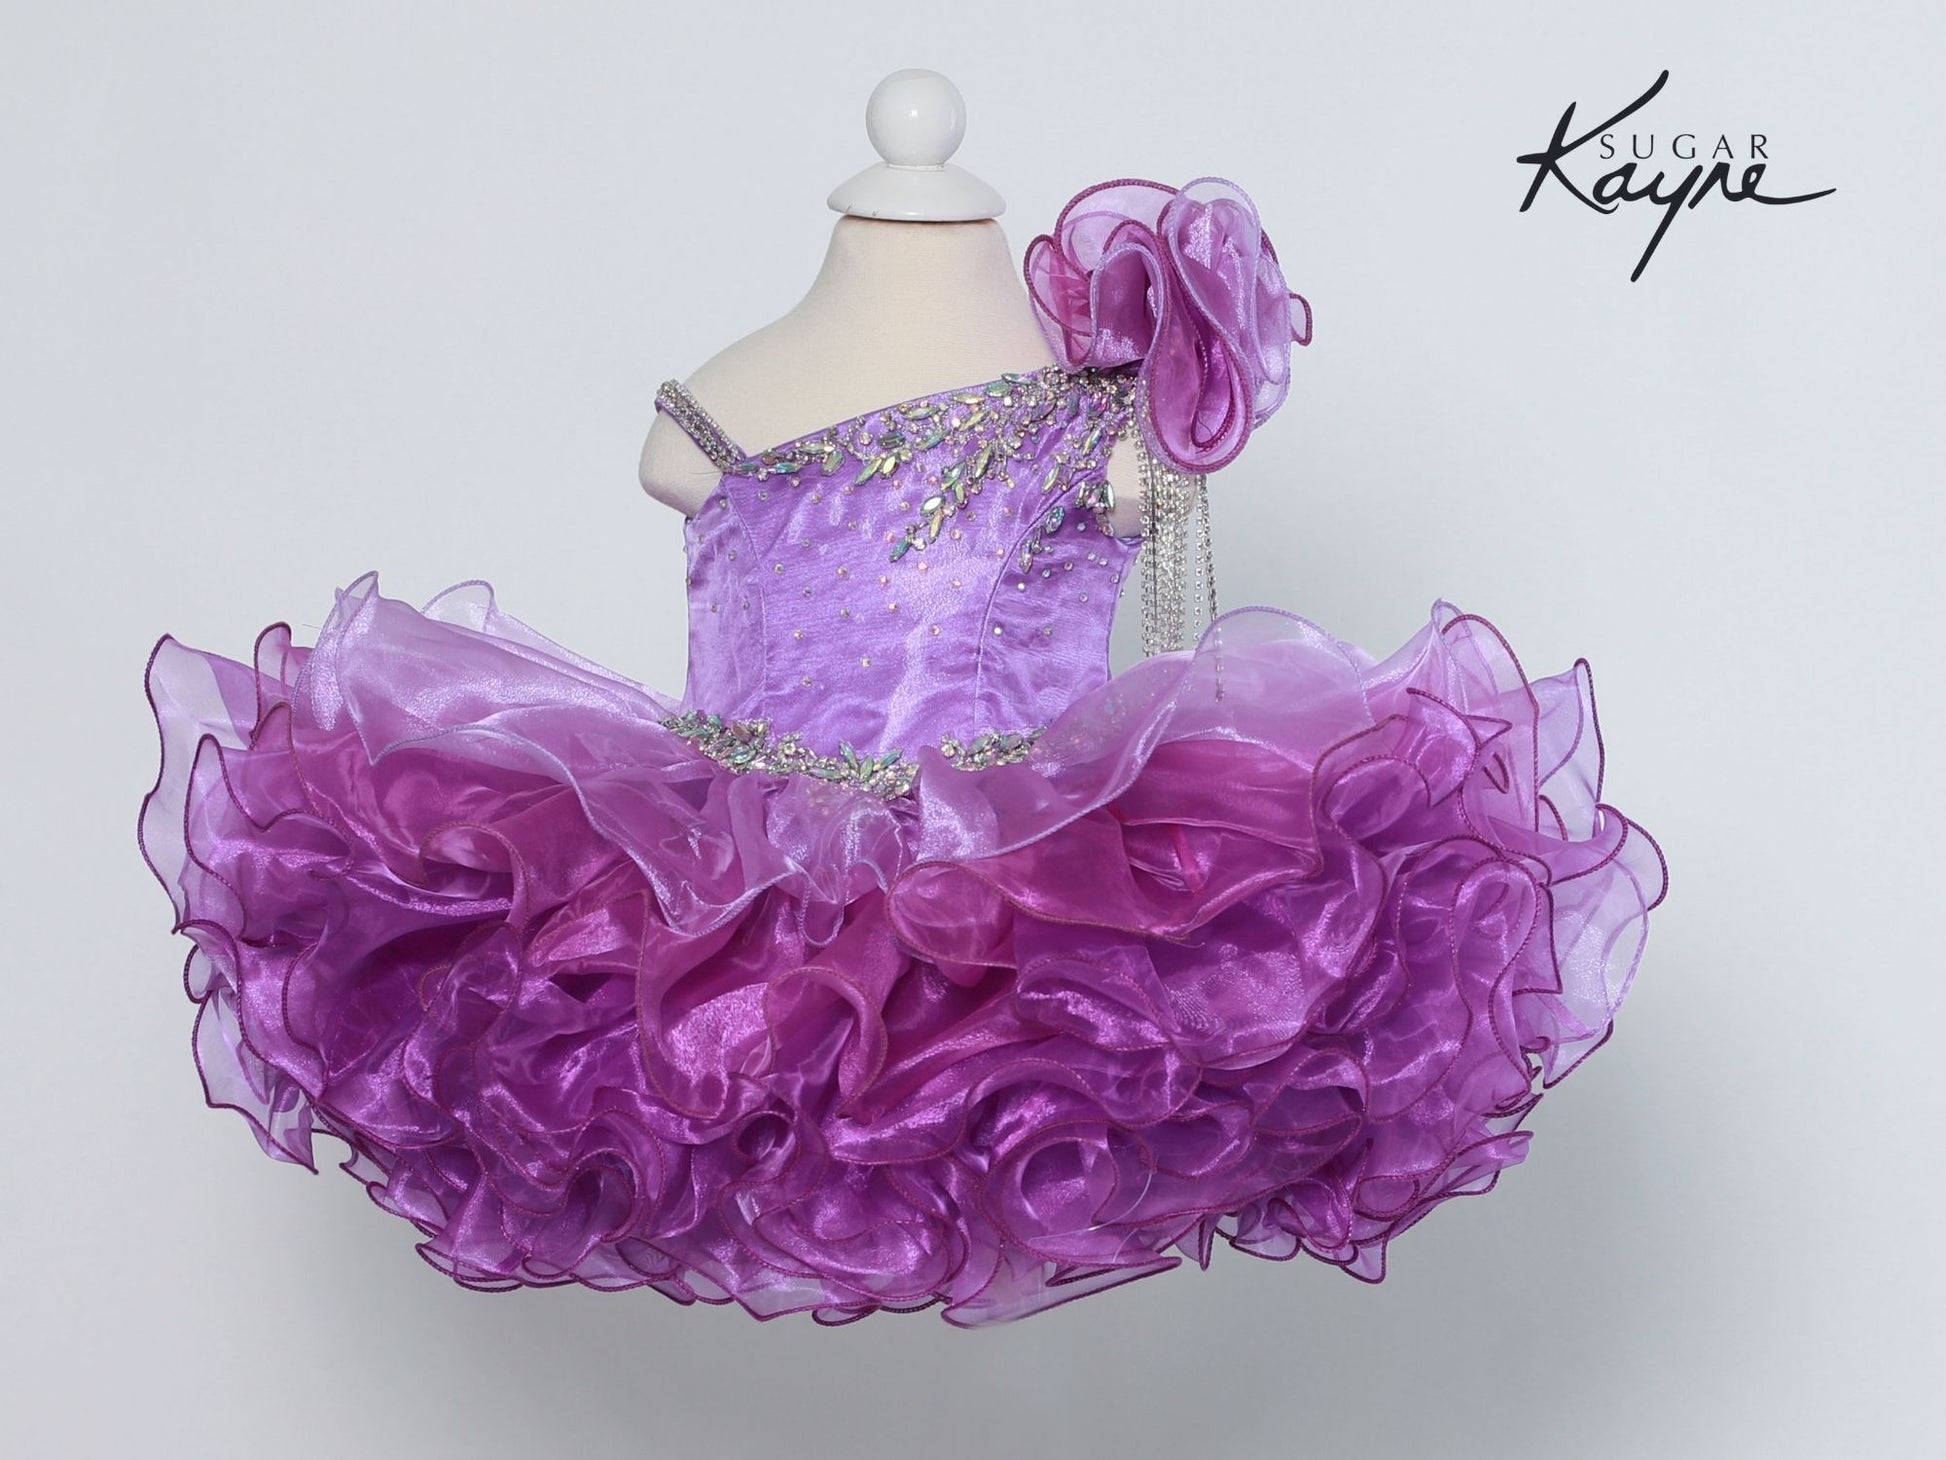 Sugar Kayne C206 One Shoulder Ombre Cupcake Pageant Dress Rhinestone Tassel Formal Gown One Shoulder with an organza embellishments and rhinestone fringe. Corset back lace up. Ombre color shift.  sizes: 0M, 6M, 12M, 18M, 24M, 2T, 3T, 4T, 5T, 6T  Colors: Sunset, Iris